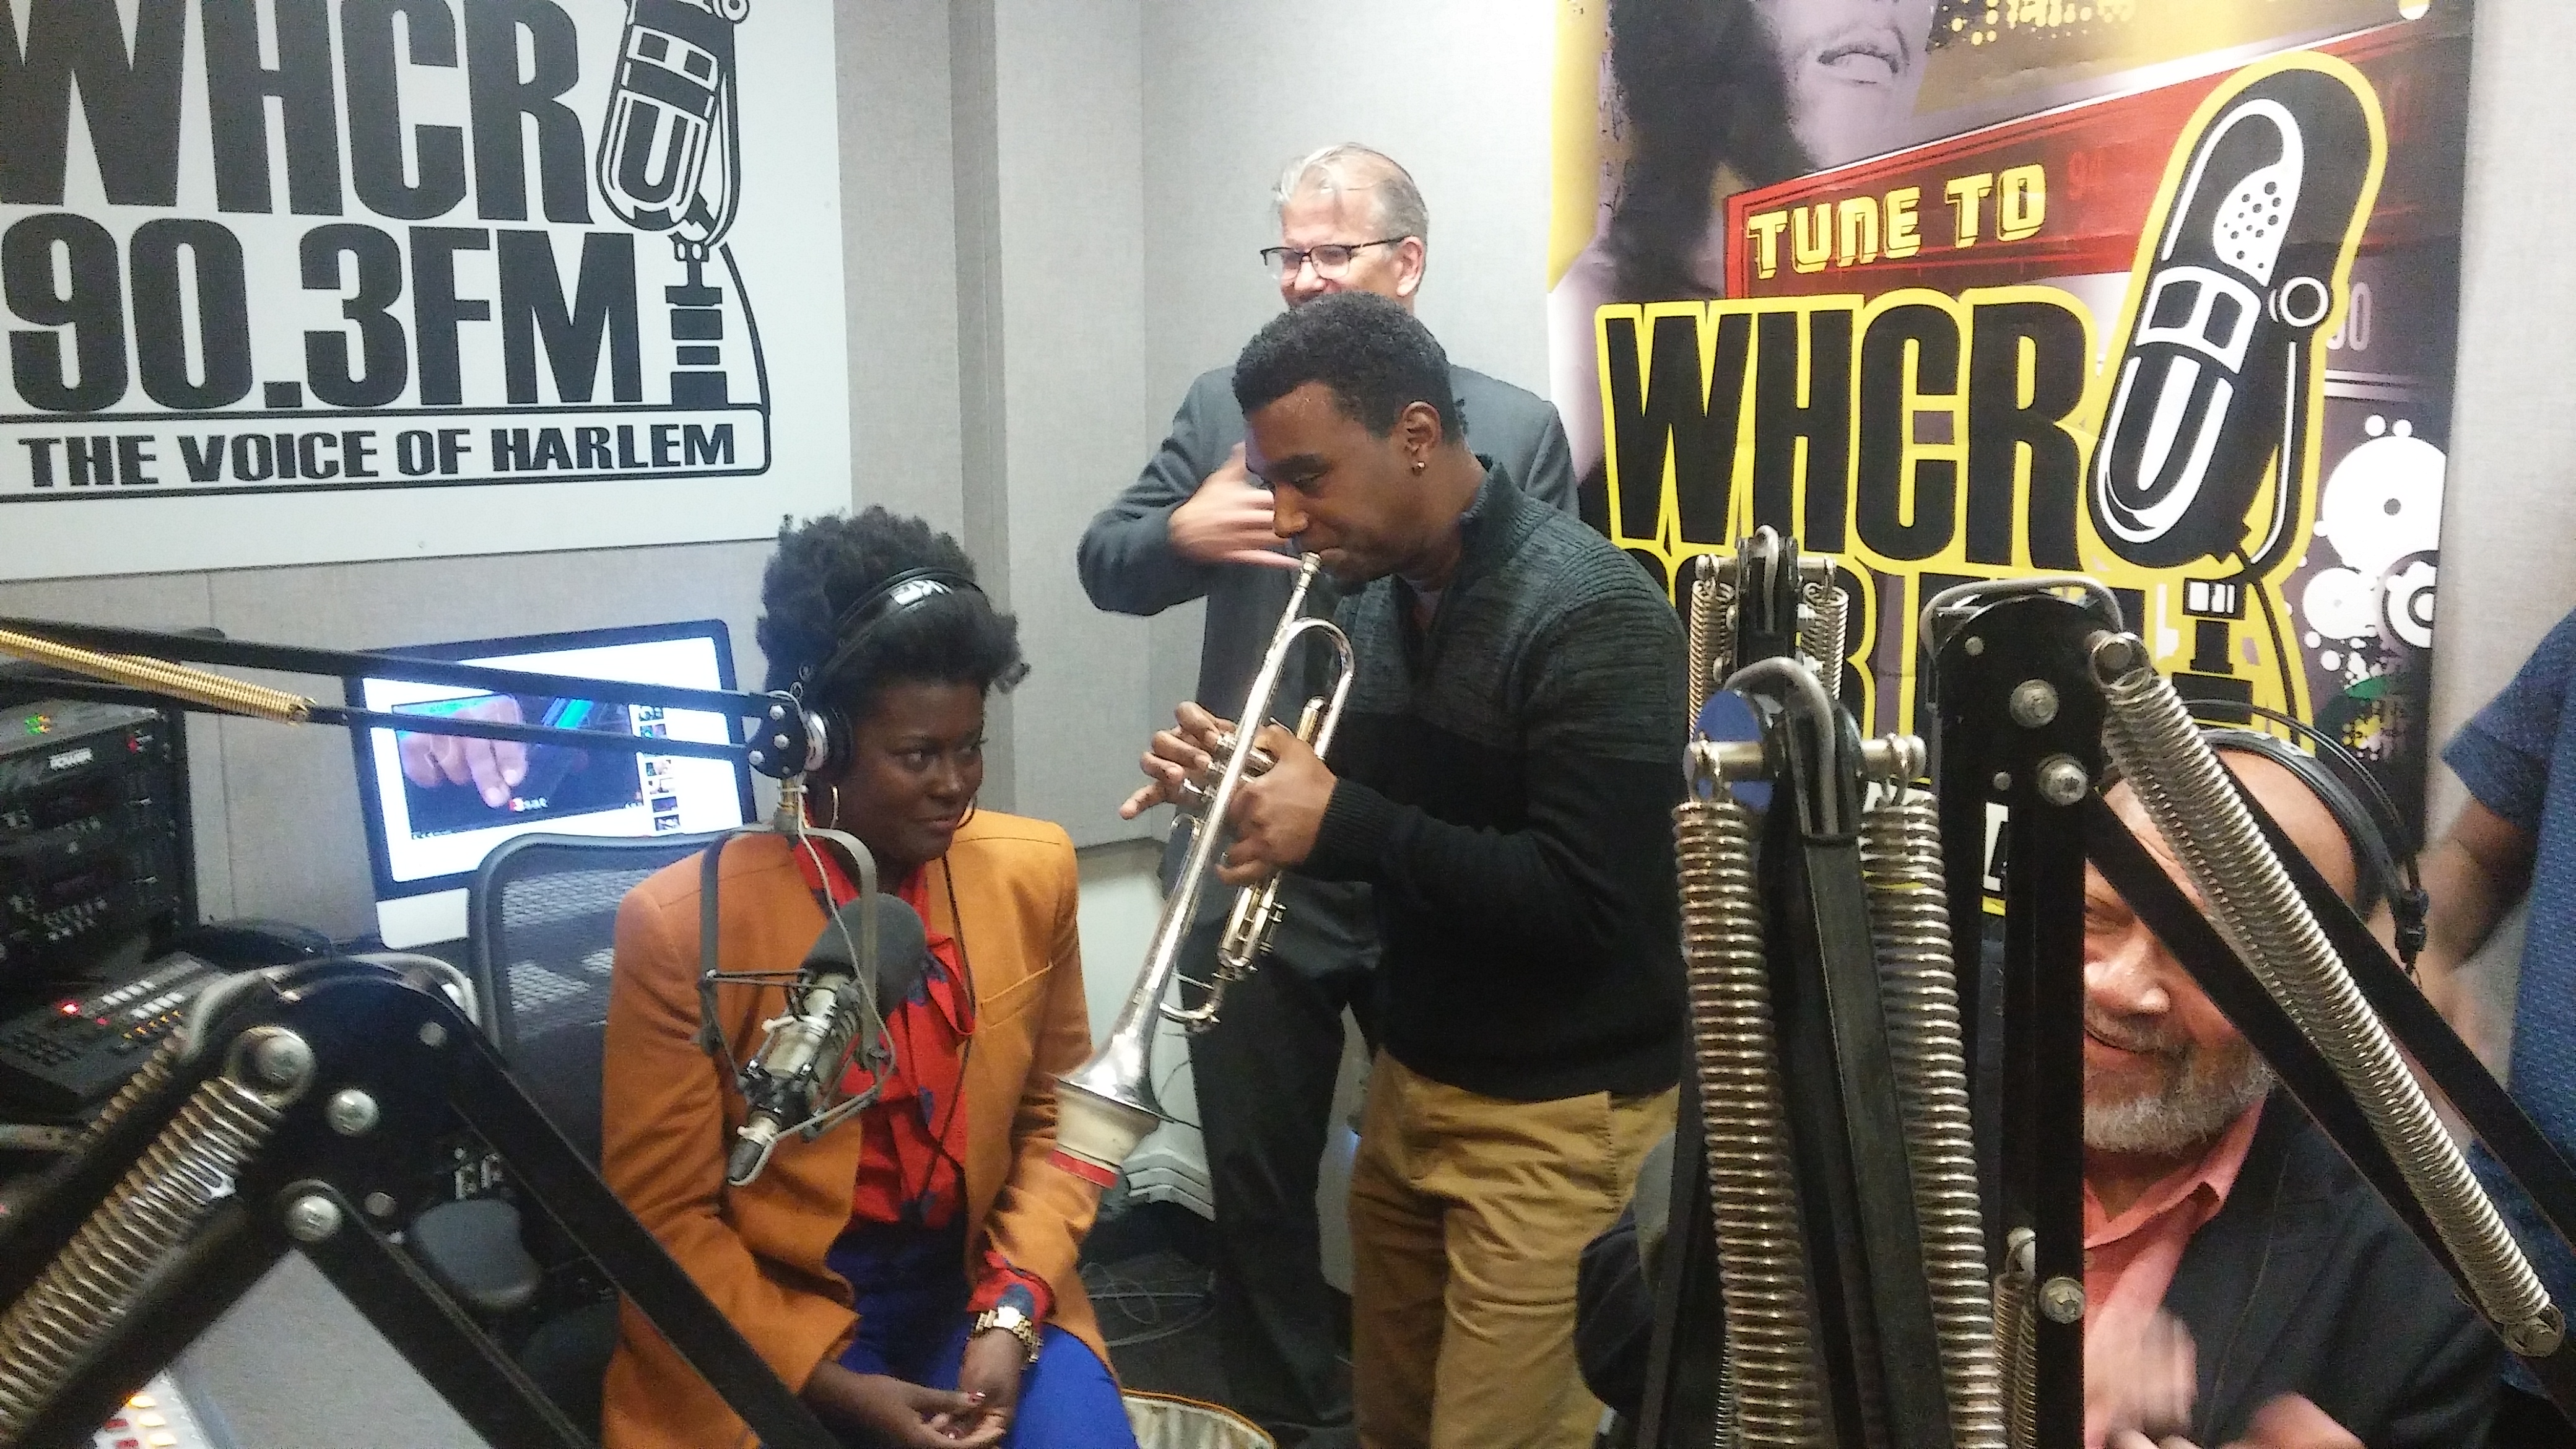 NEA Jazz Masters Breakfast at 90.3FM/NY WHCR - one person playing musical instruments